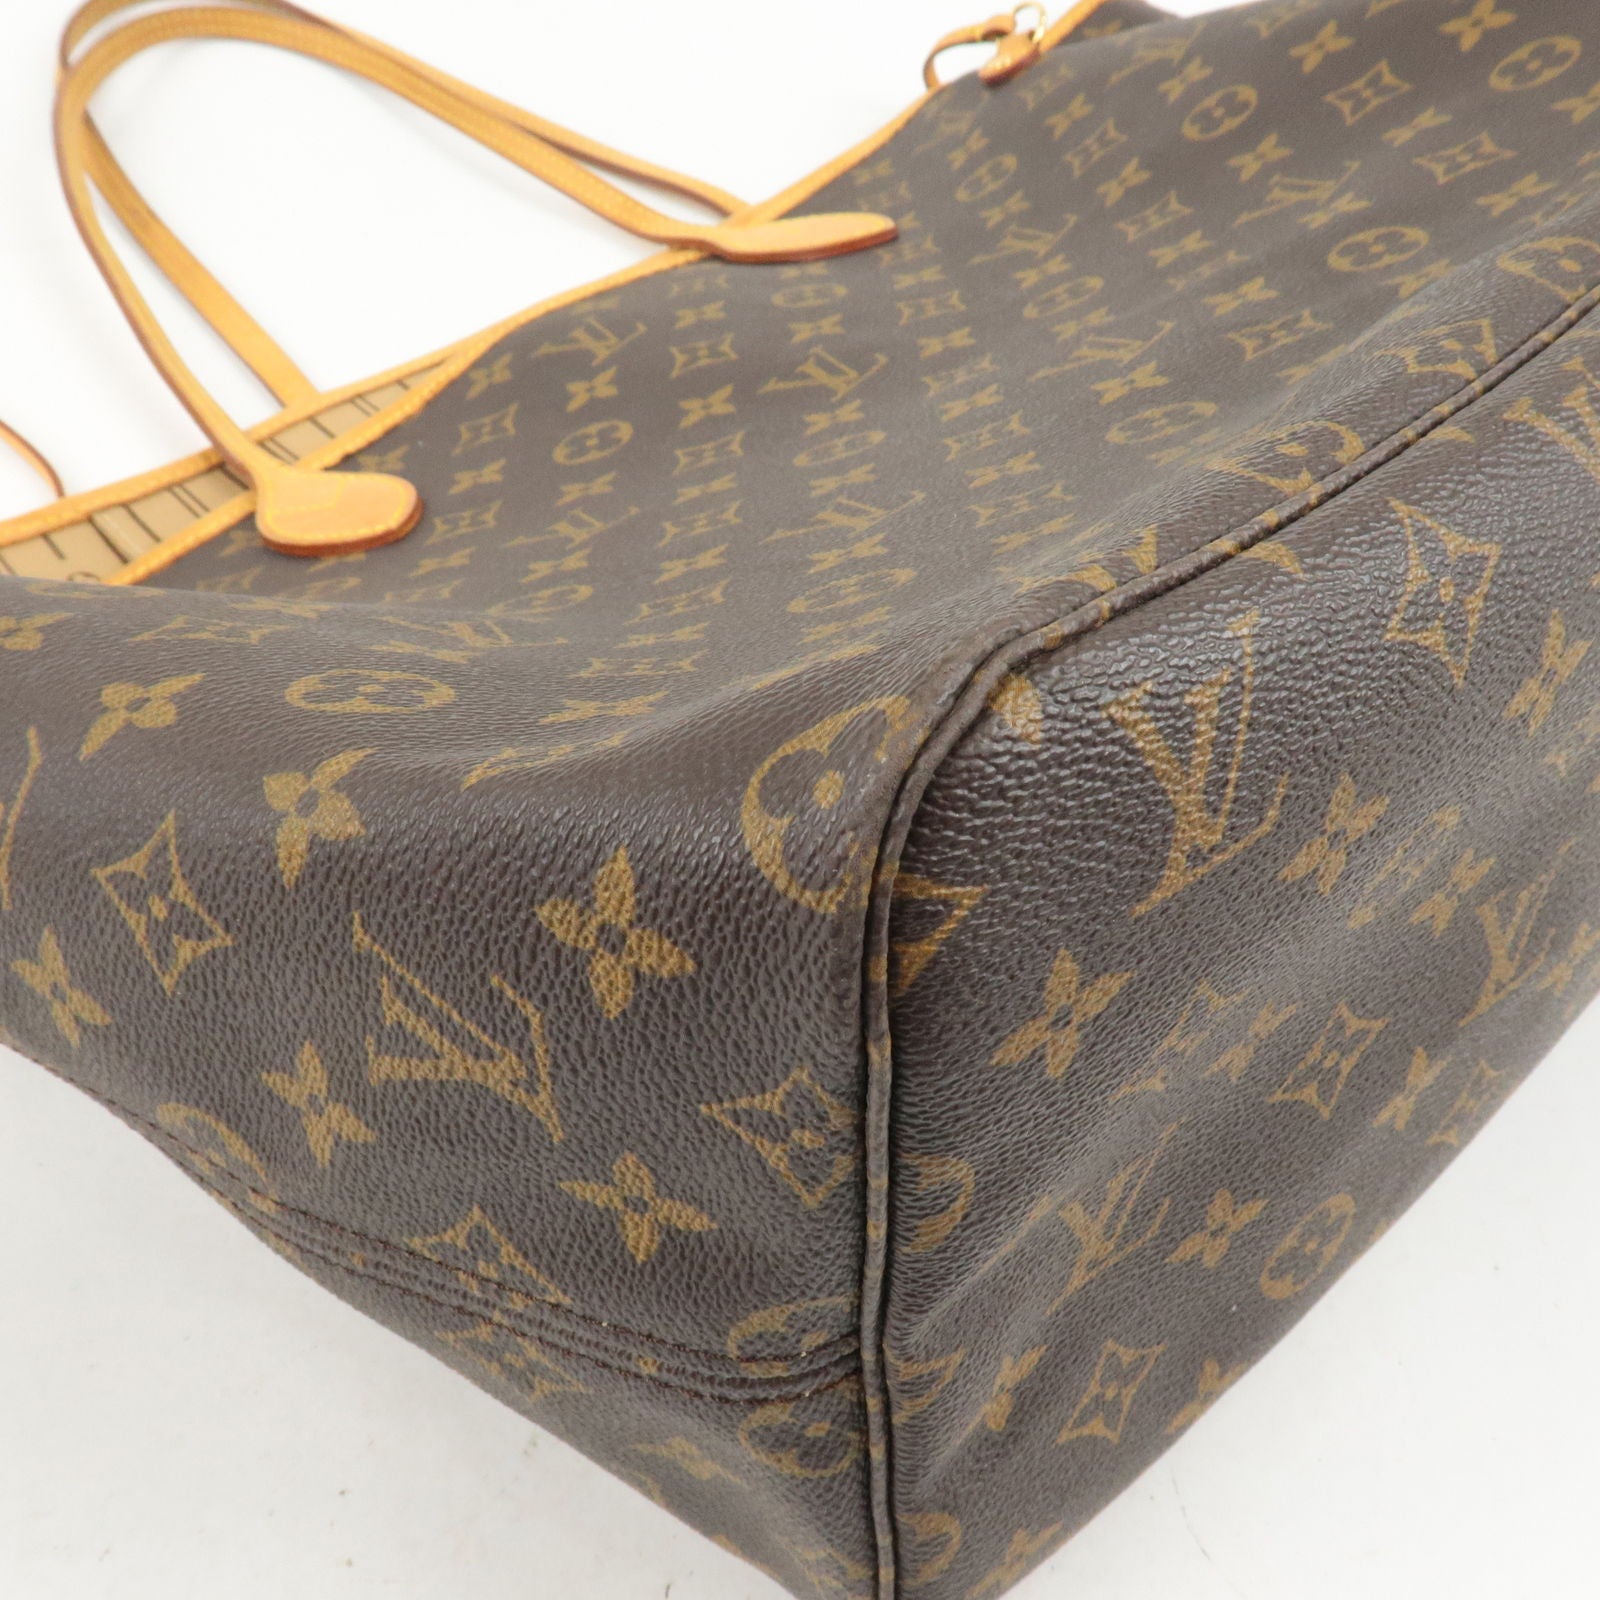 LOUIS VUITTON LOUIS VUITTON Neverfull GM Shoulder Tote Bag M40157 Monogram  Used LV M40157｜Product Code：2123100002175｜BRAND OFF Online Store